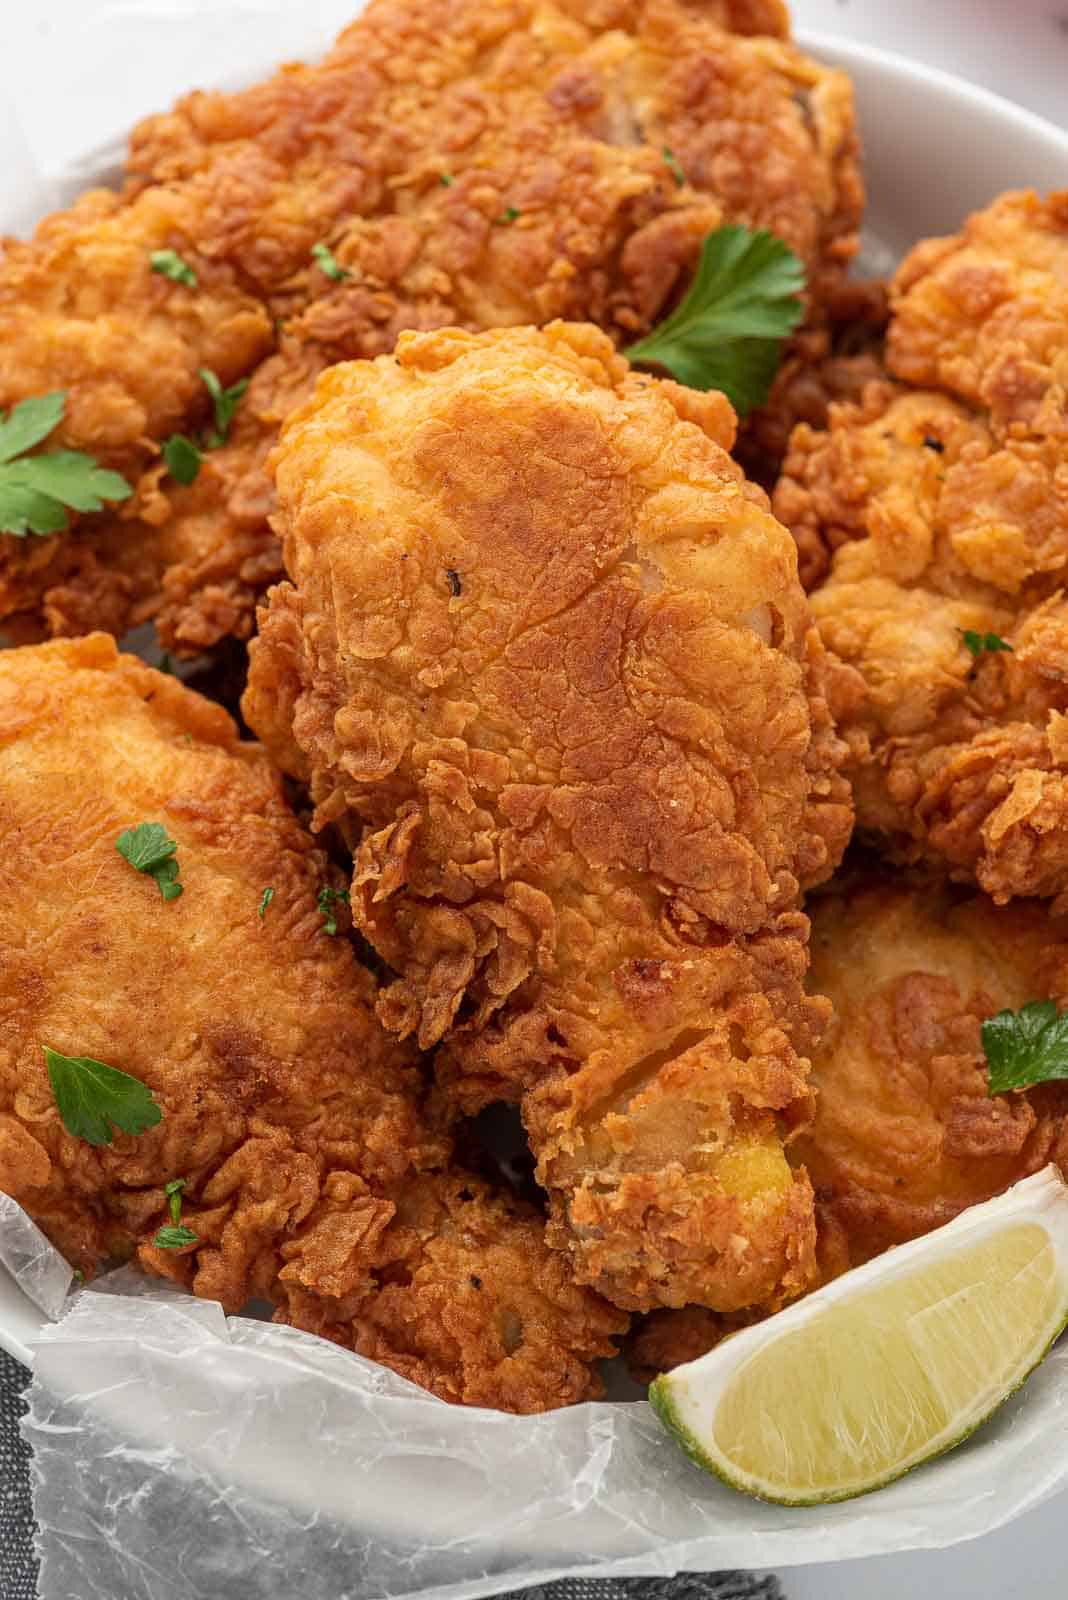 Crunchy fried chicken on a plate.